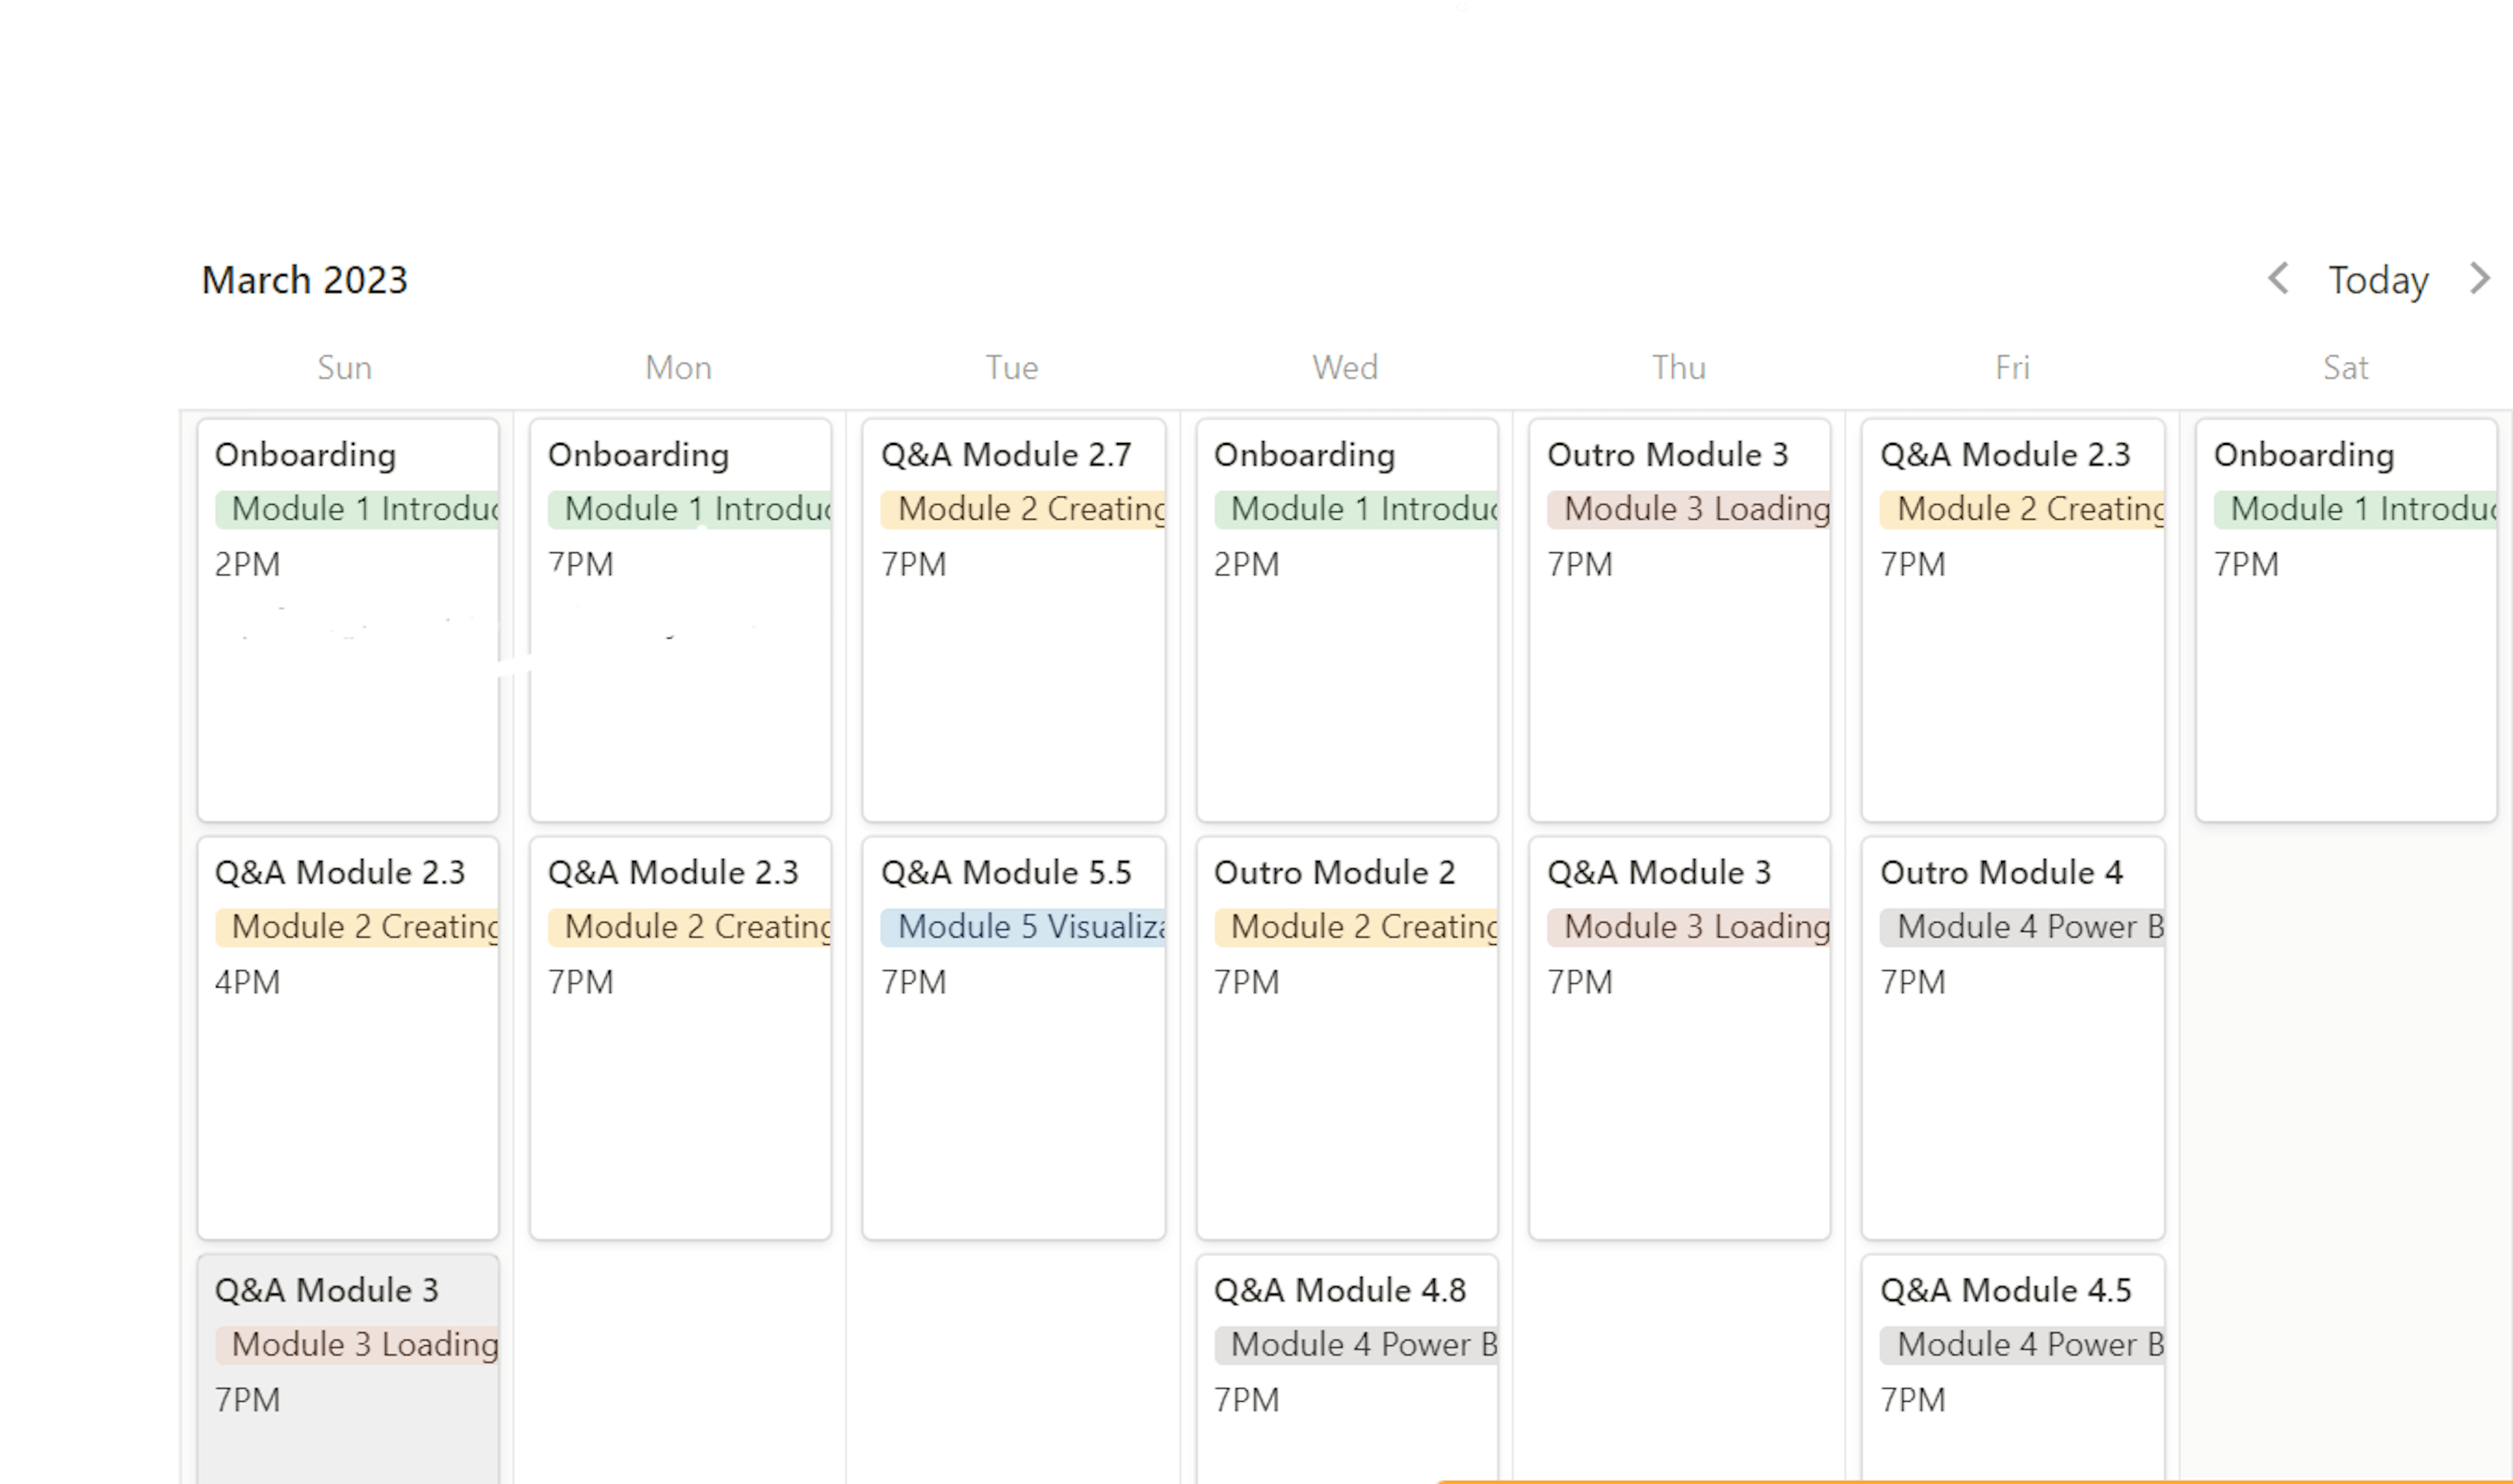 The difference in the number of live sessions is visible even in the calendar